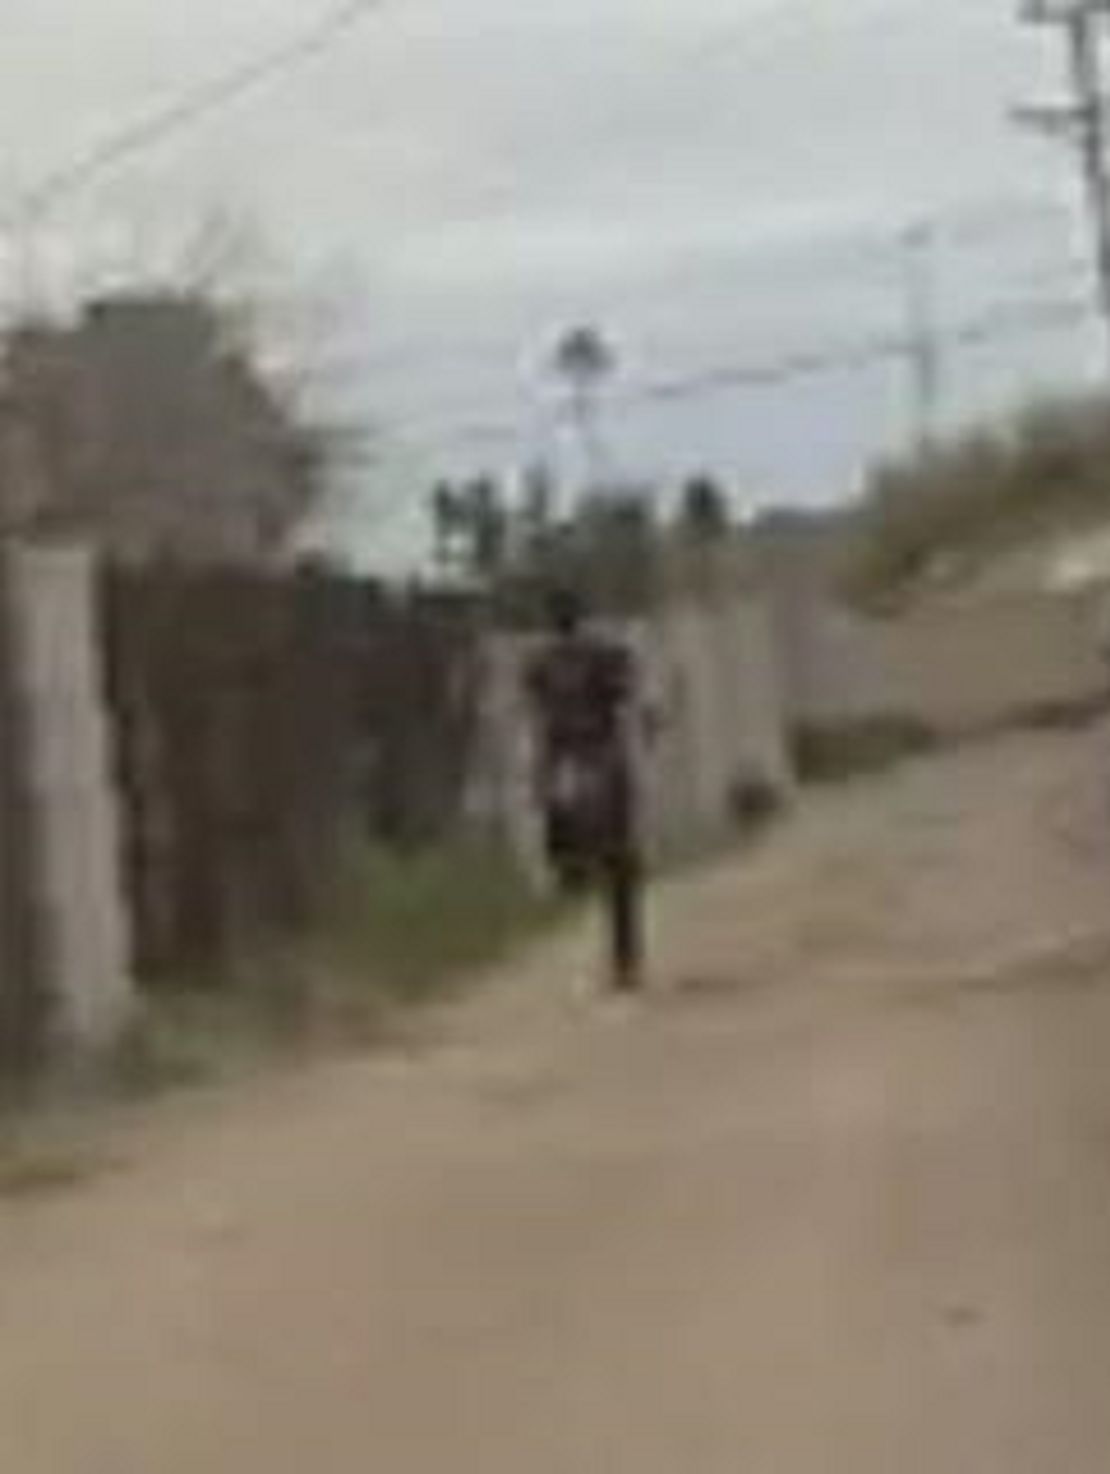 Video from the body camera worn by the officer shows the 14-year-old running away before he was shot. 